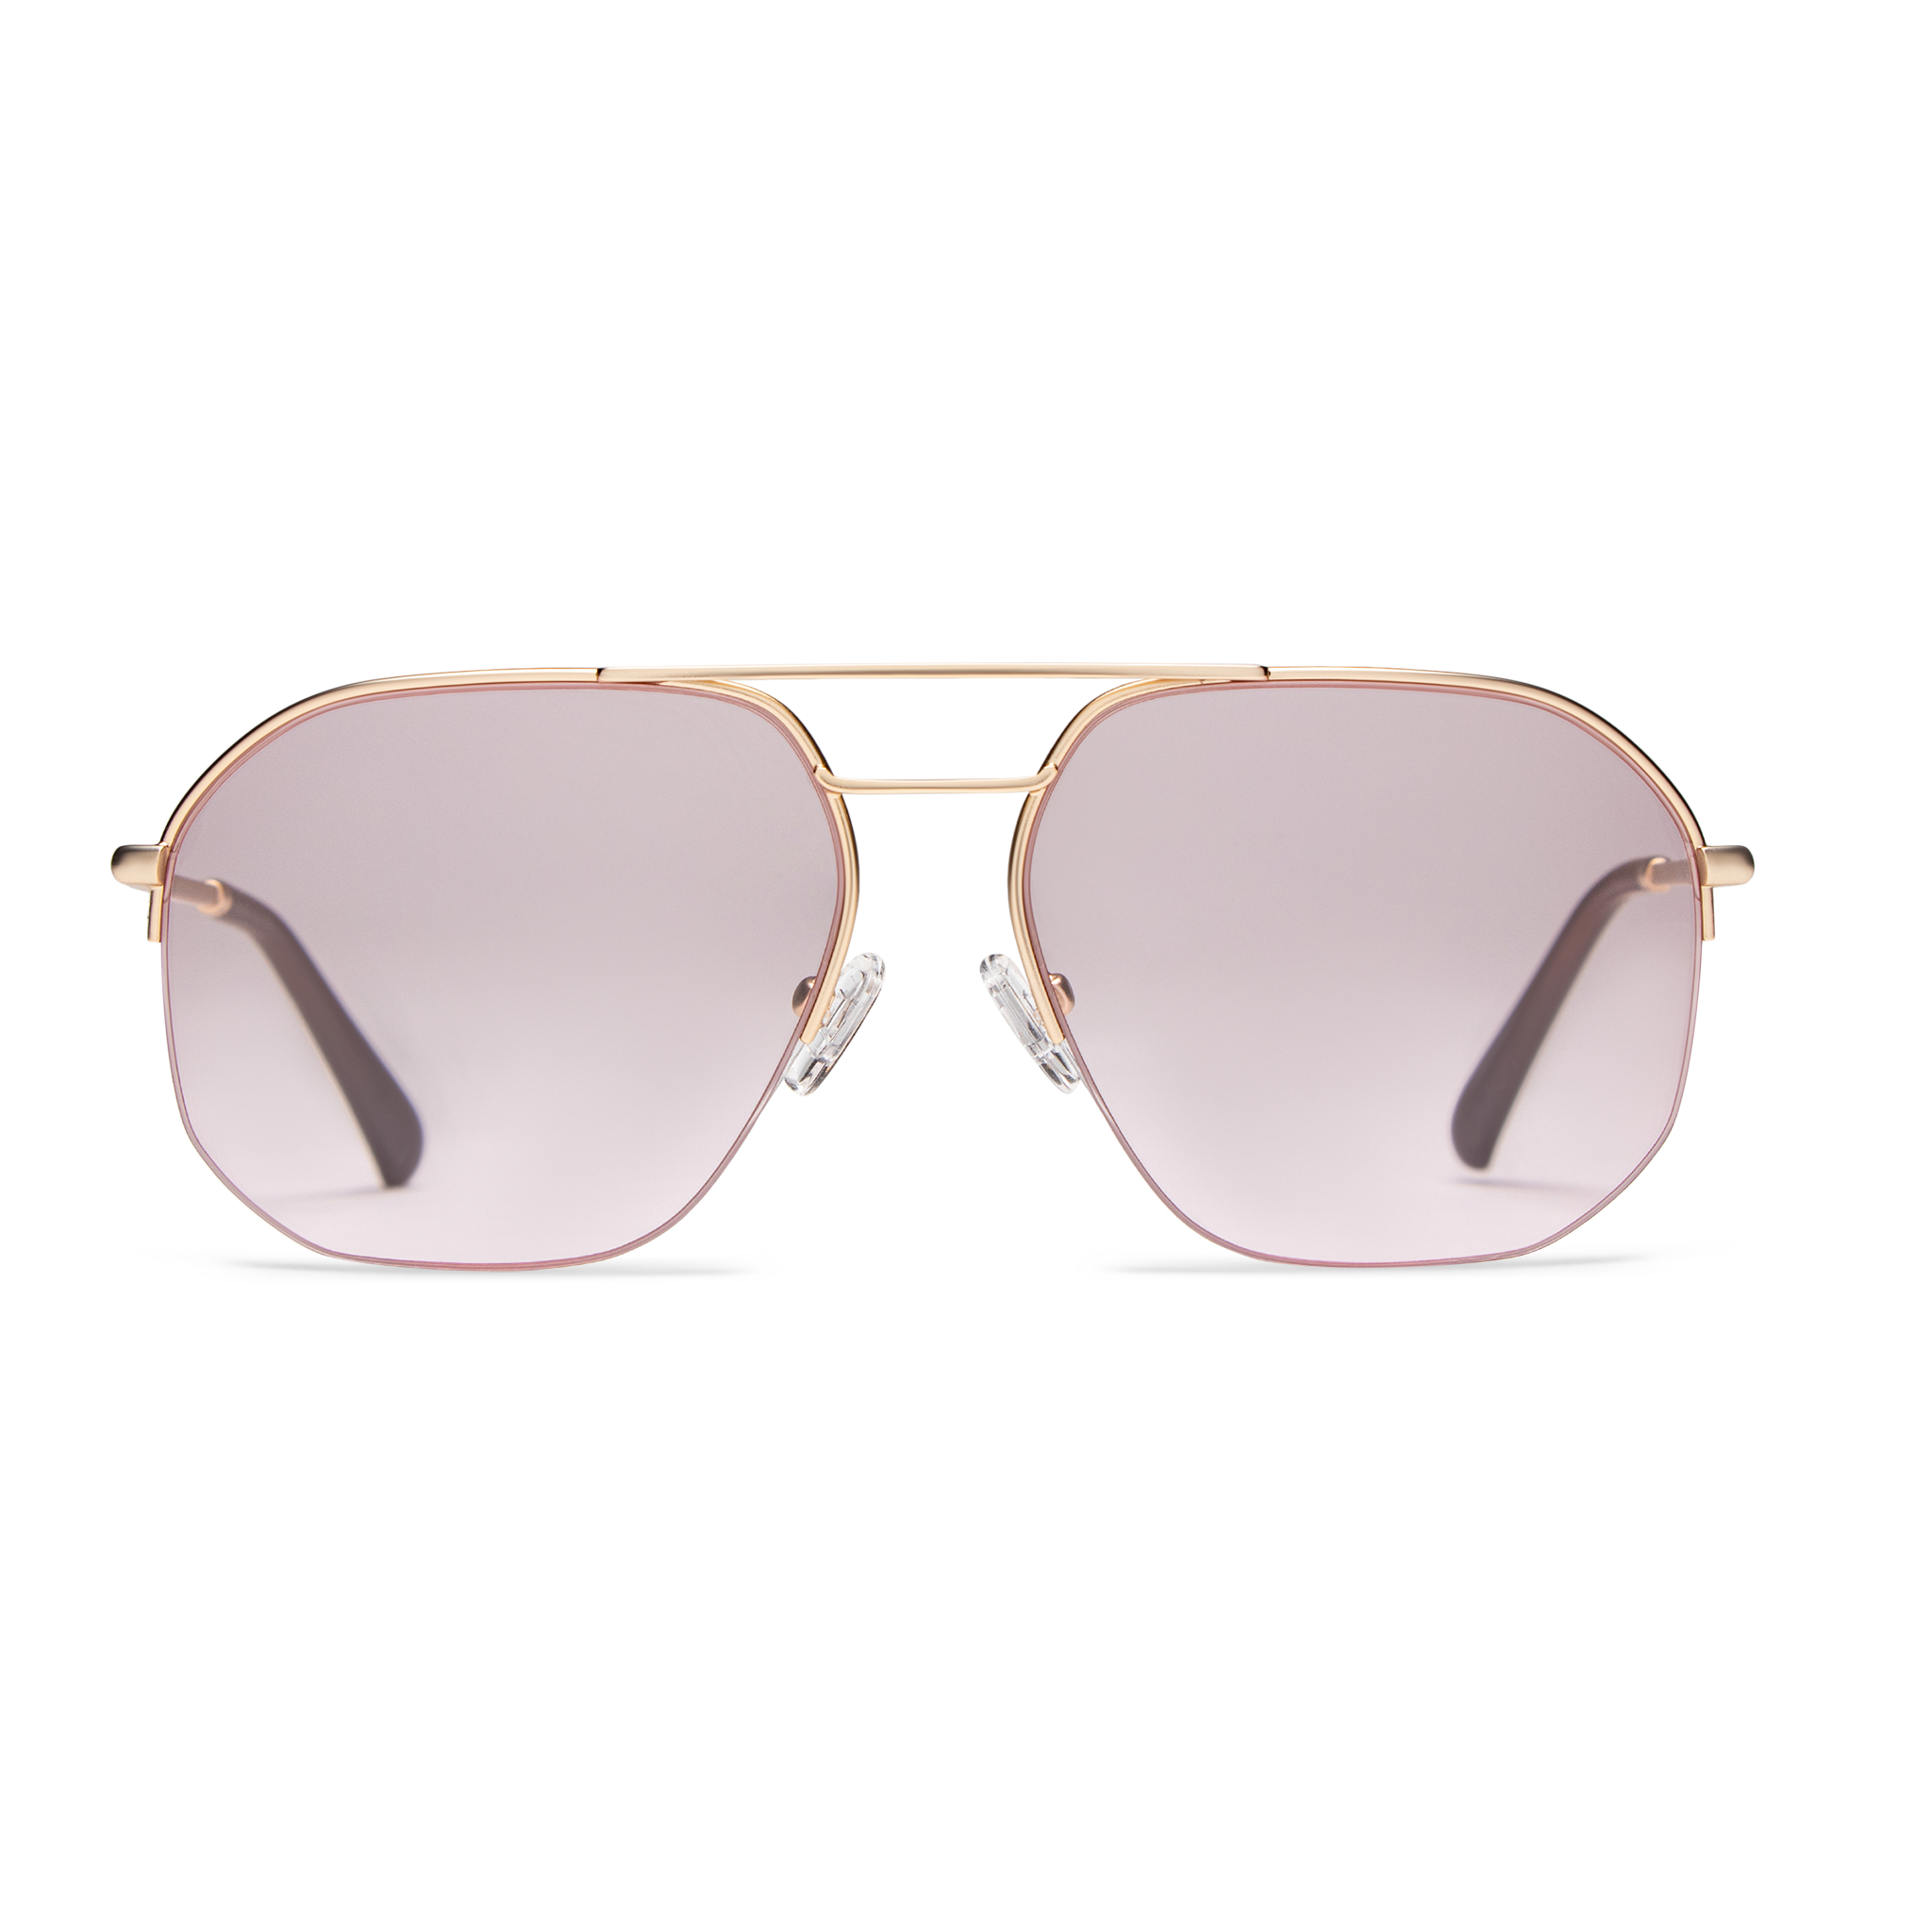 Muse Pink Tinted Readers